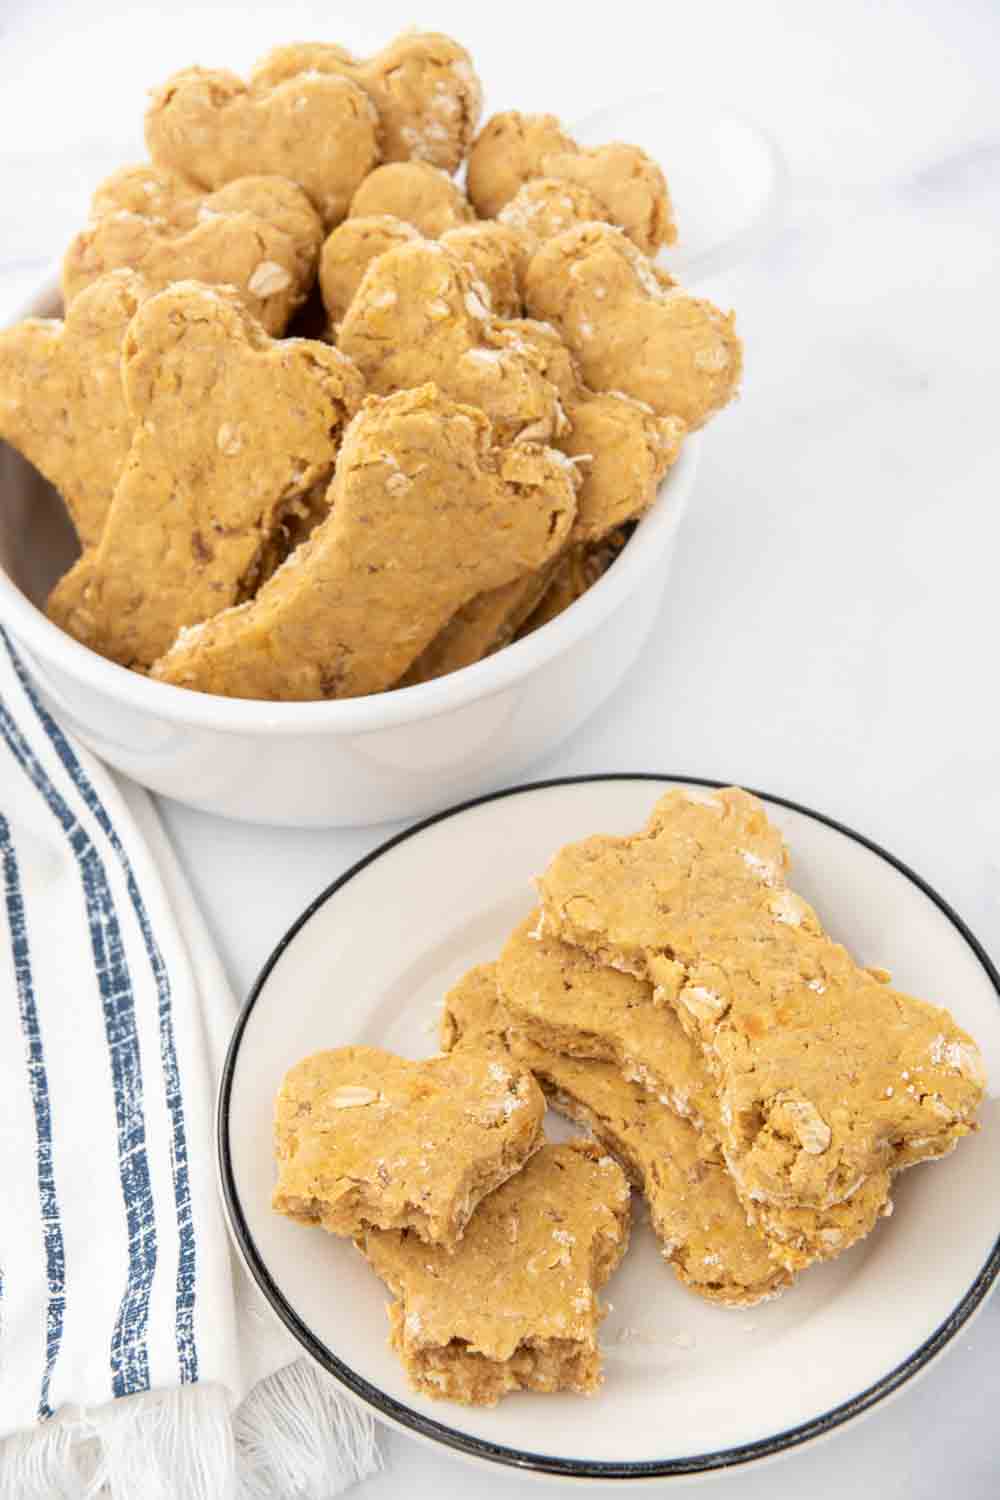 Homemade duck dog treats on a plate and in a bowl.